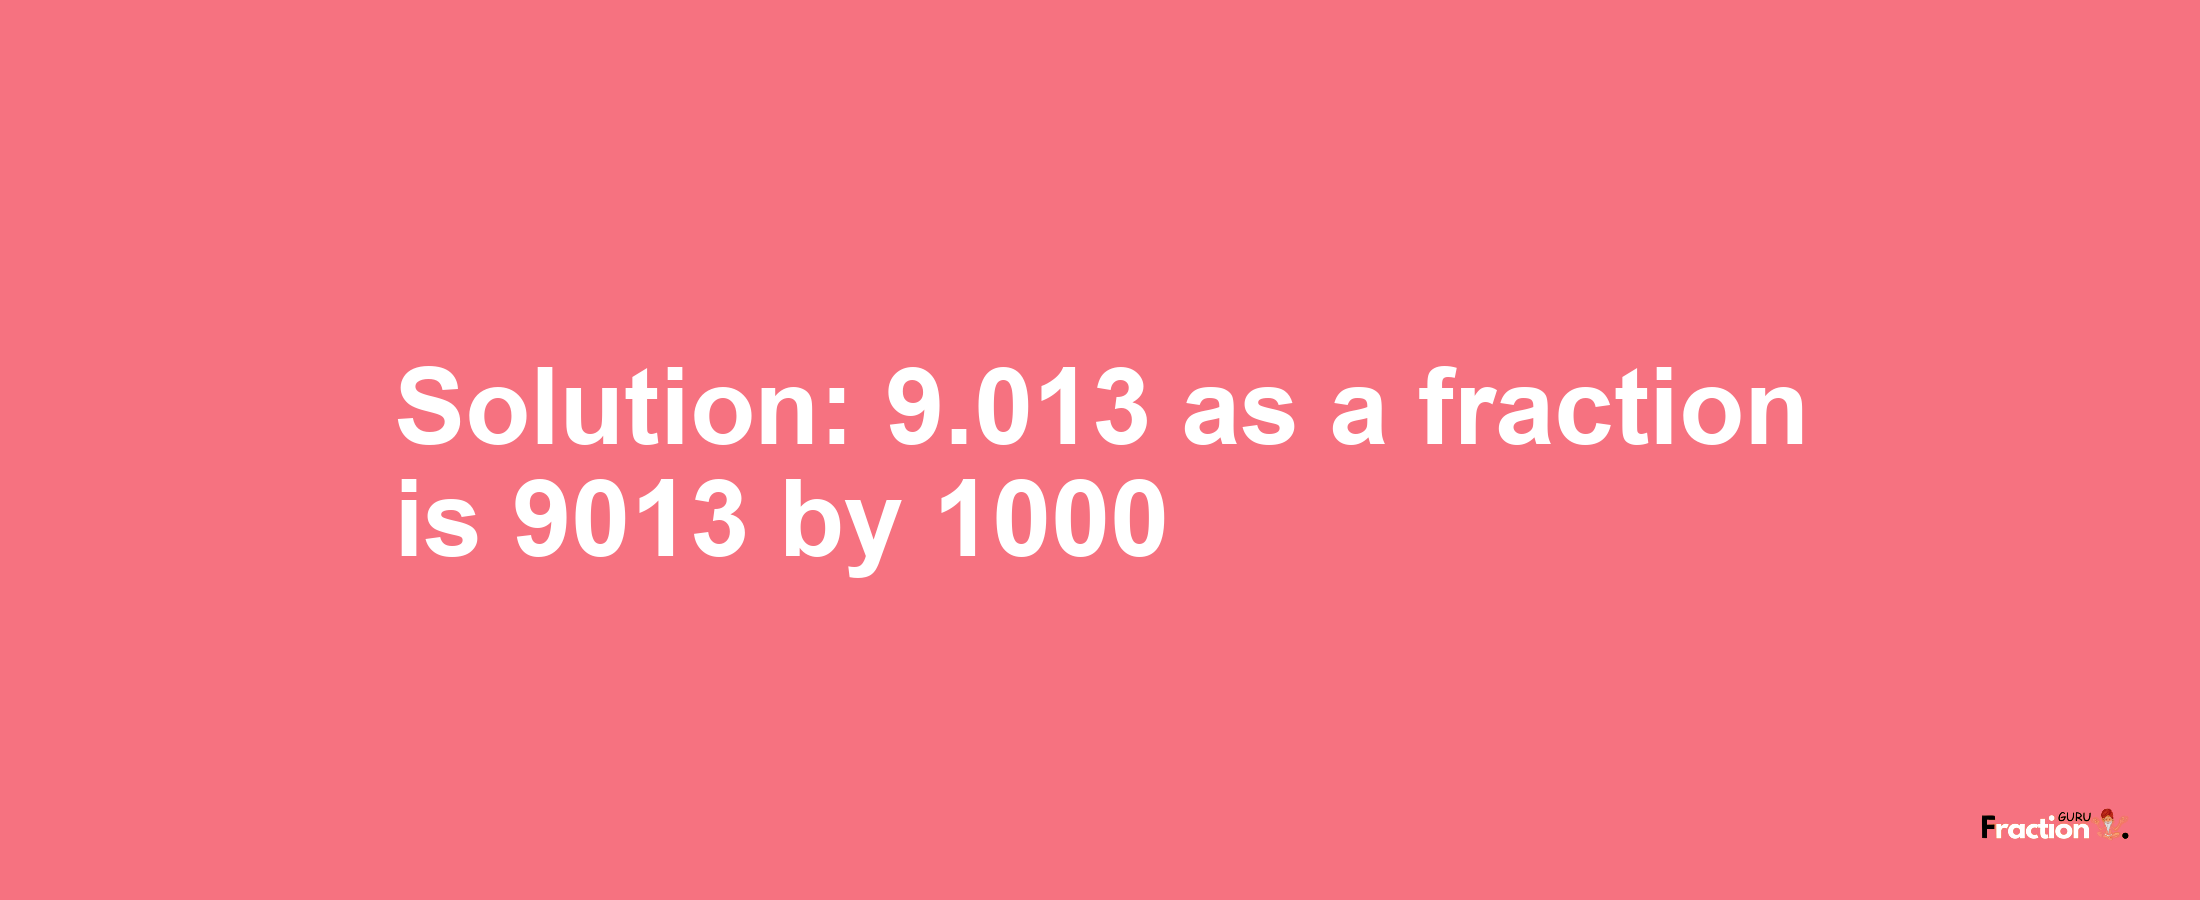 Solution:9.013 as a fraction is 9013/1000